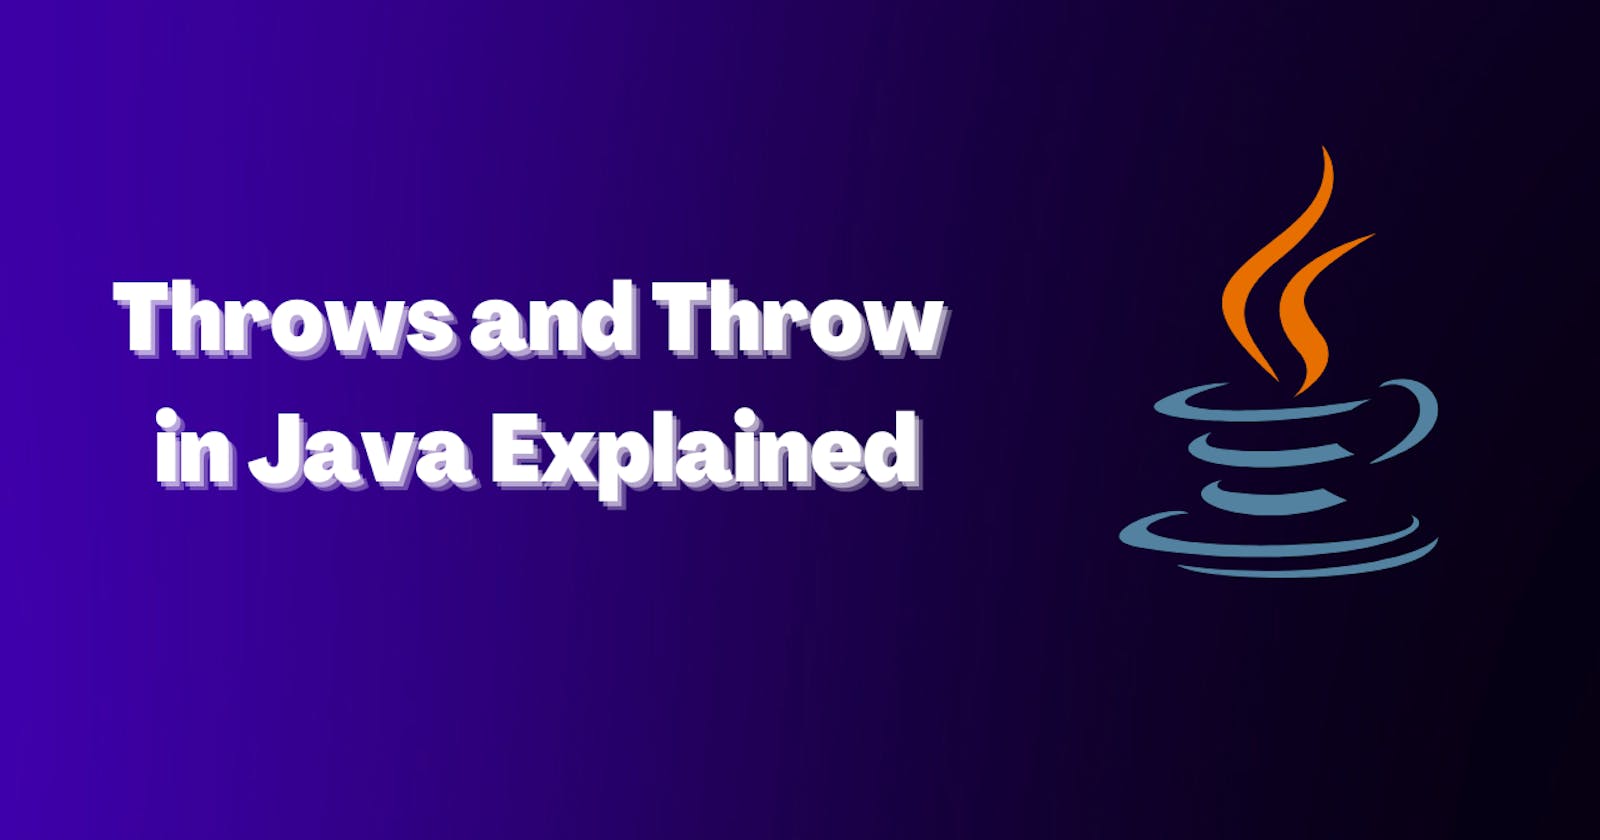 Throws and Throw in Java Explained